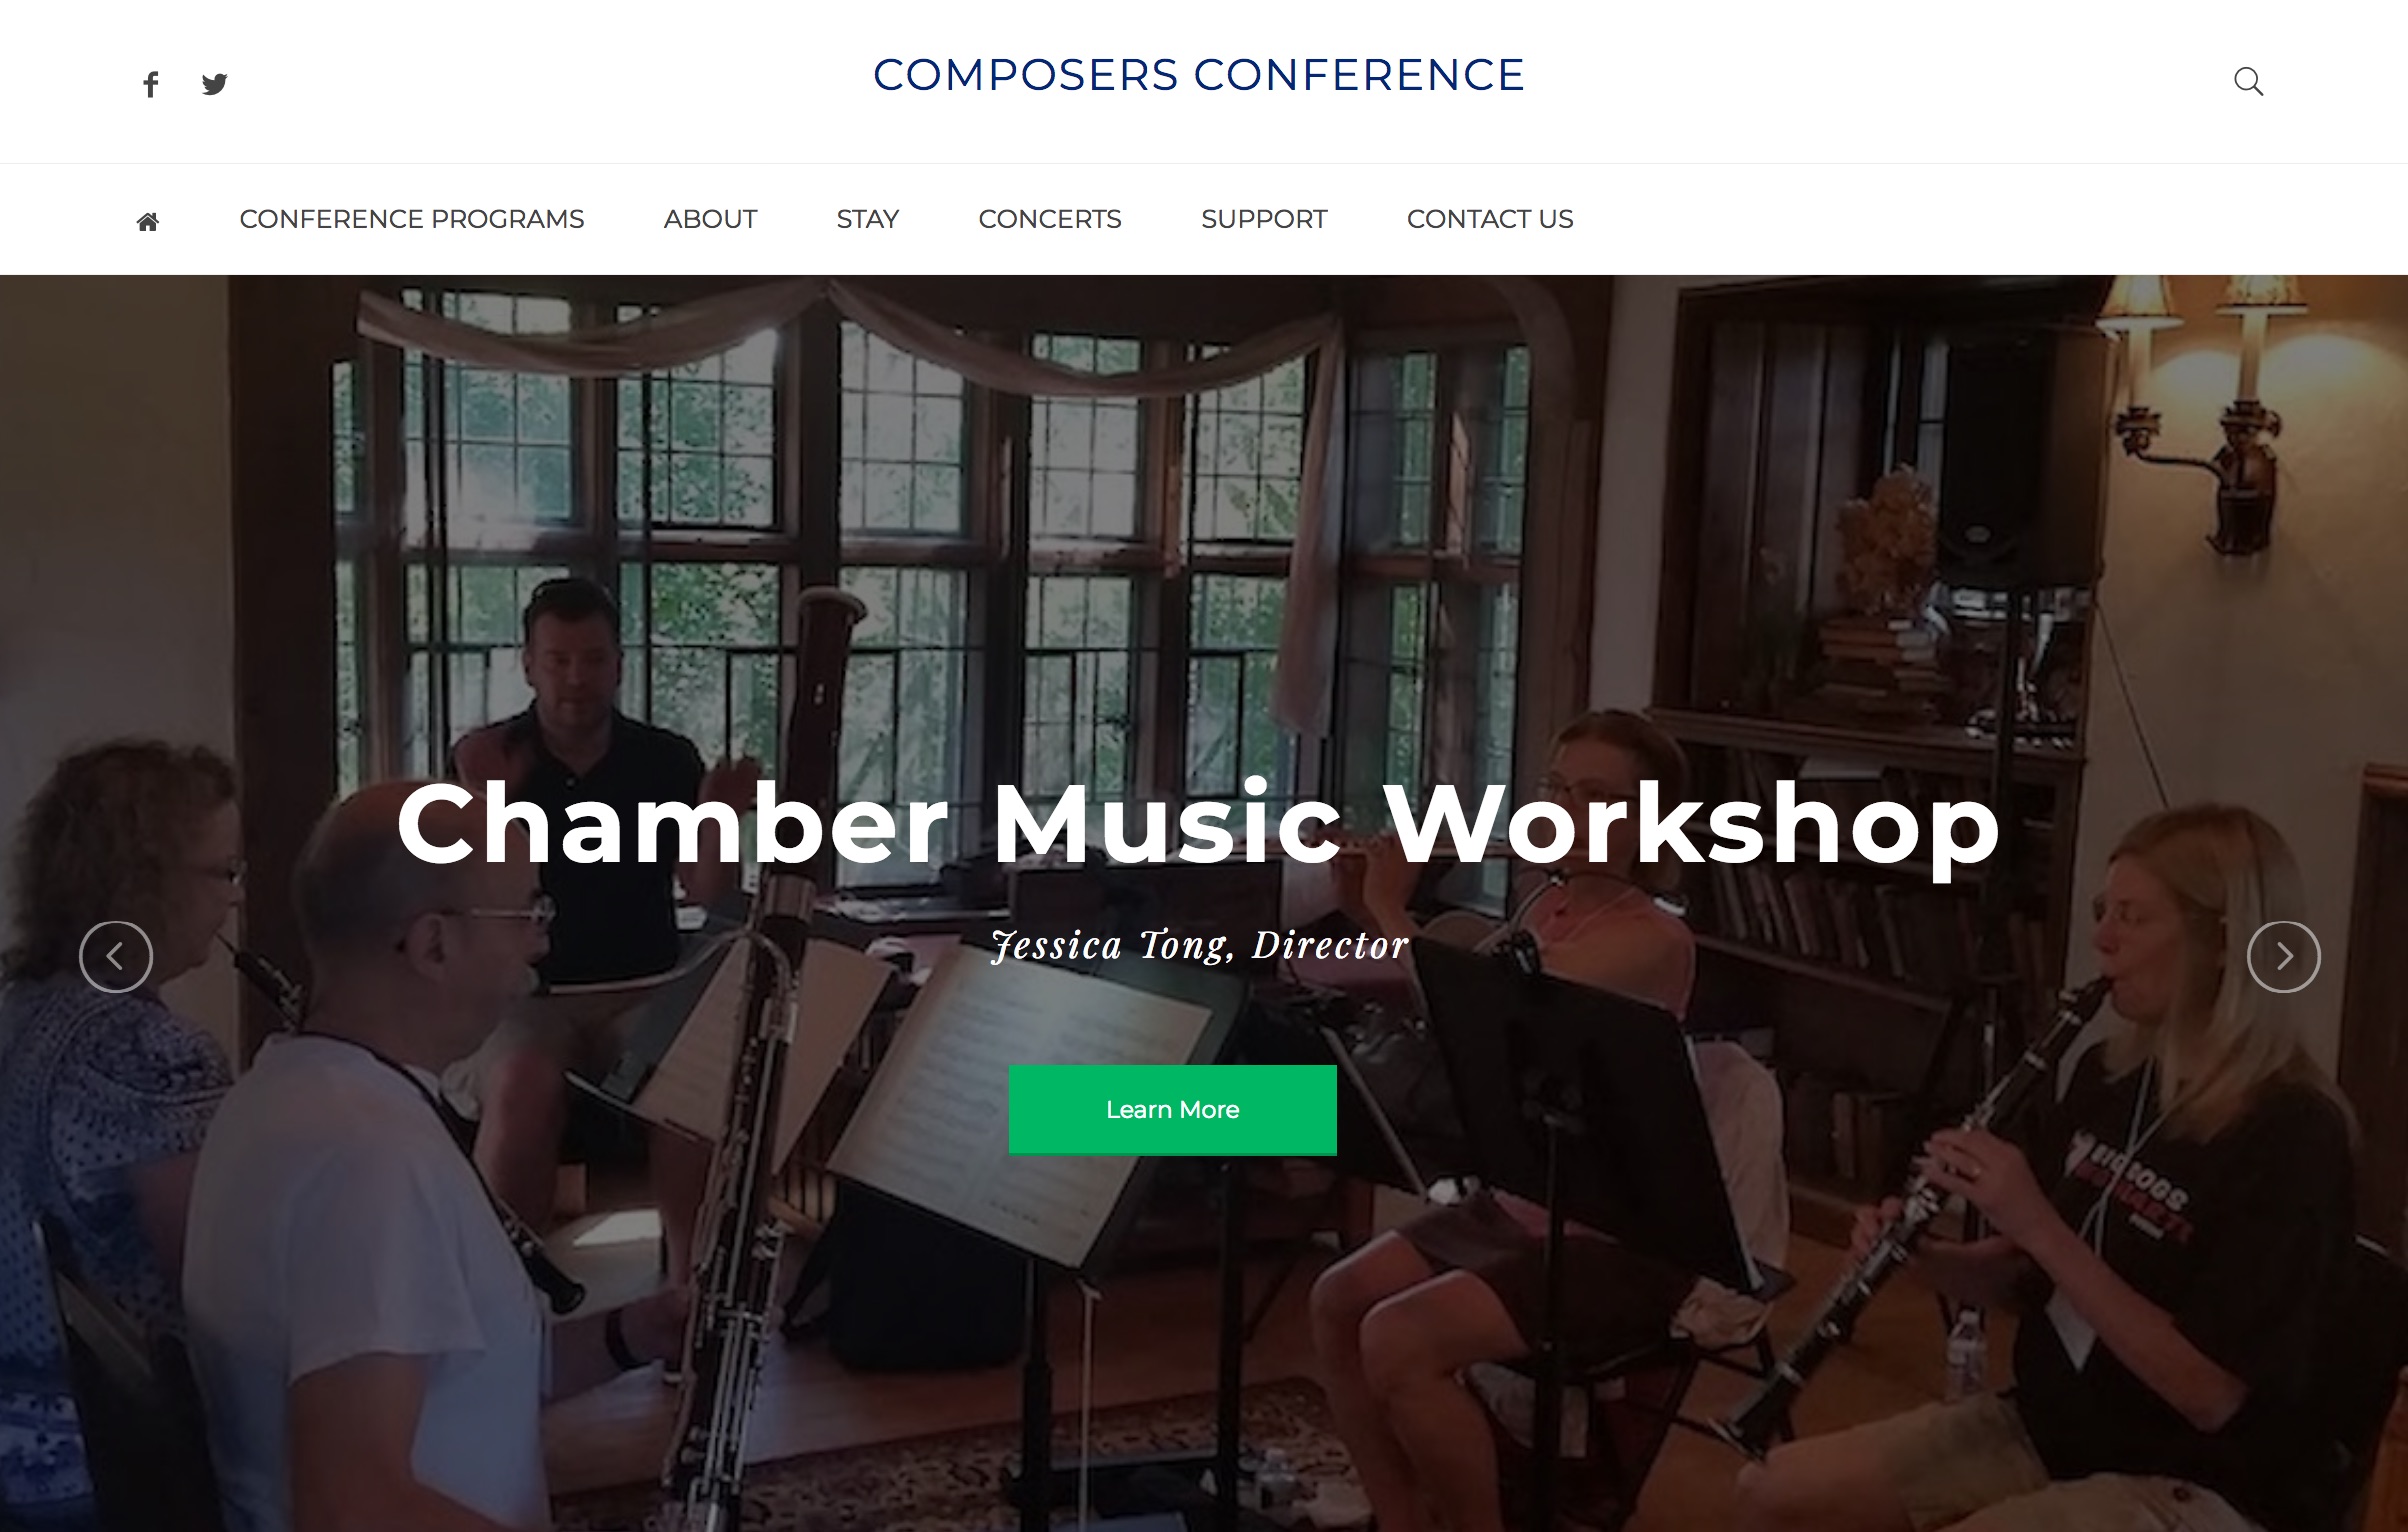 Composers Conference